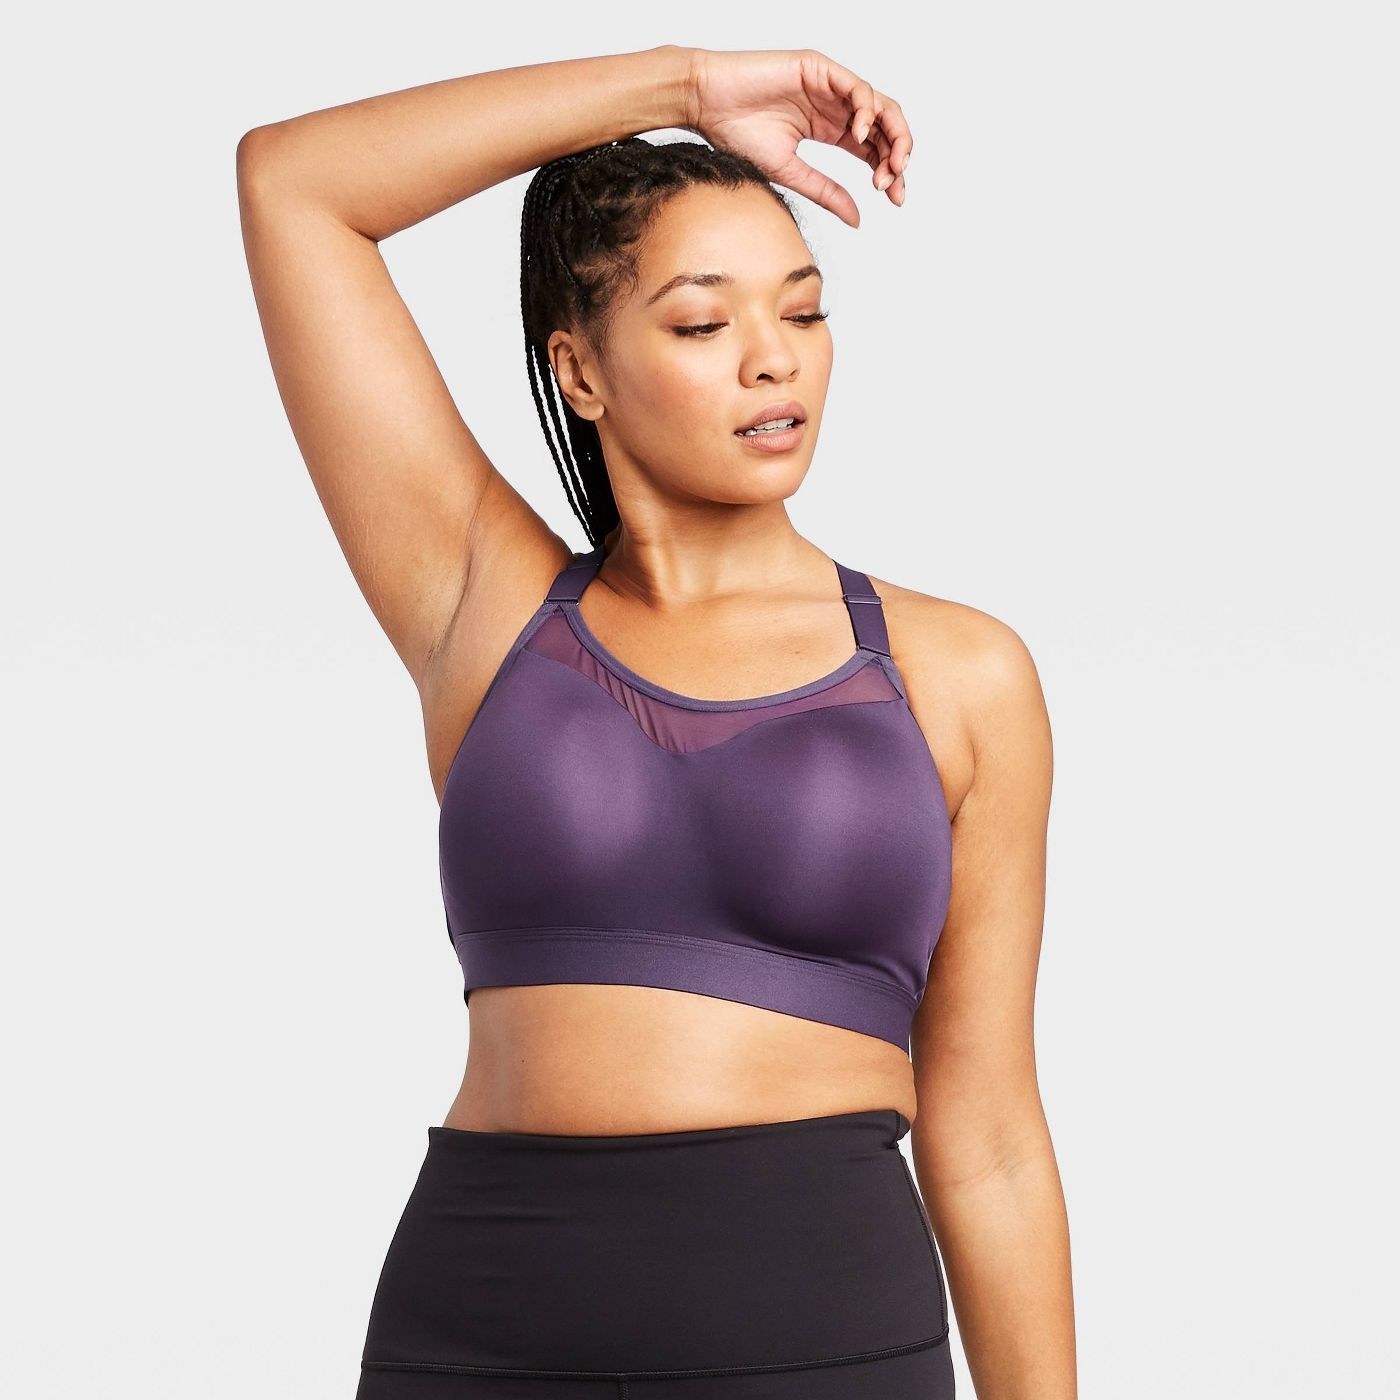 Model wearing the sports bra in purple  with a mesh panel across the top and adjustable straps